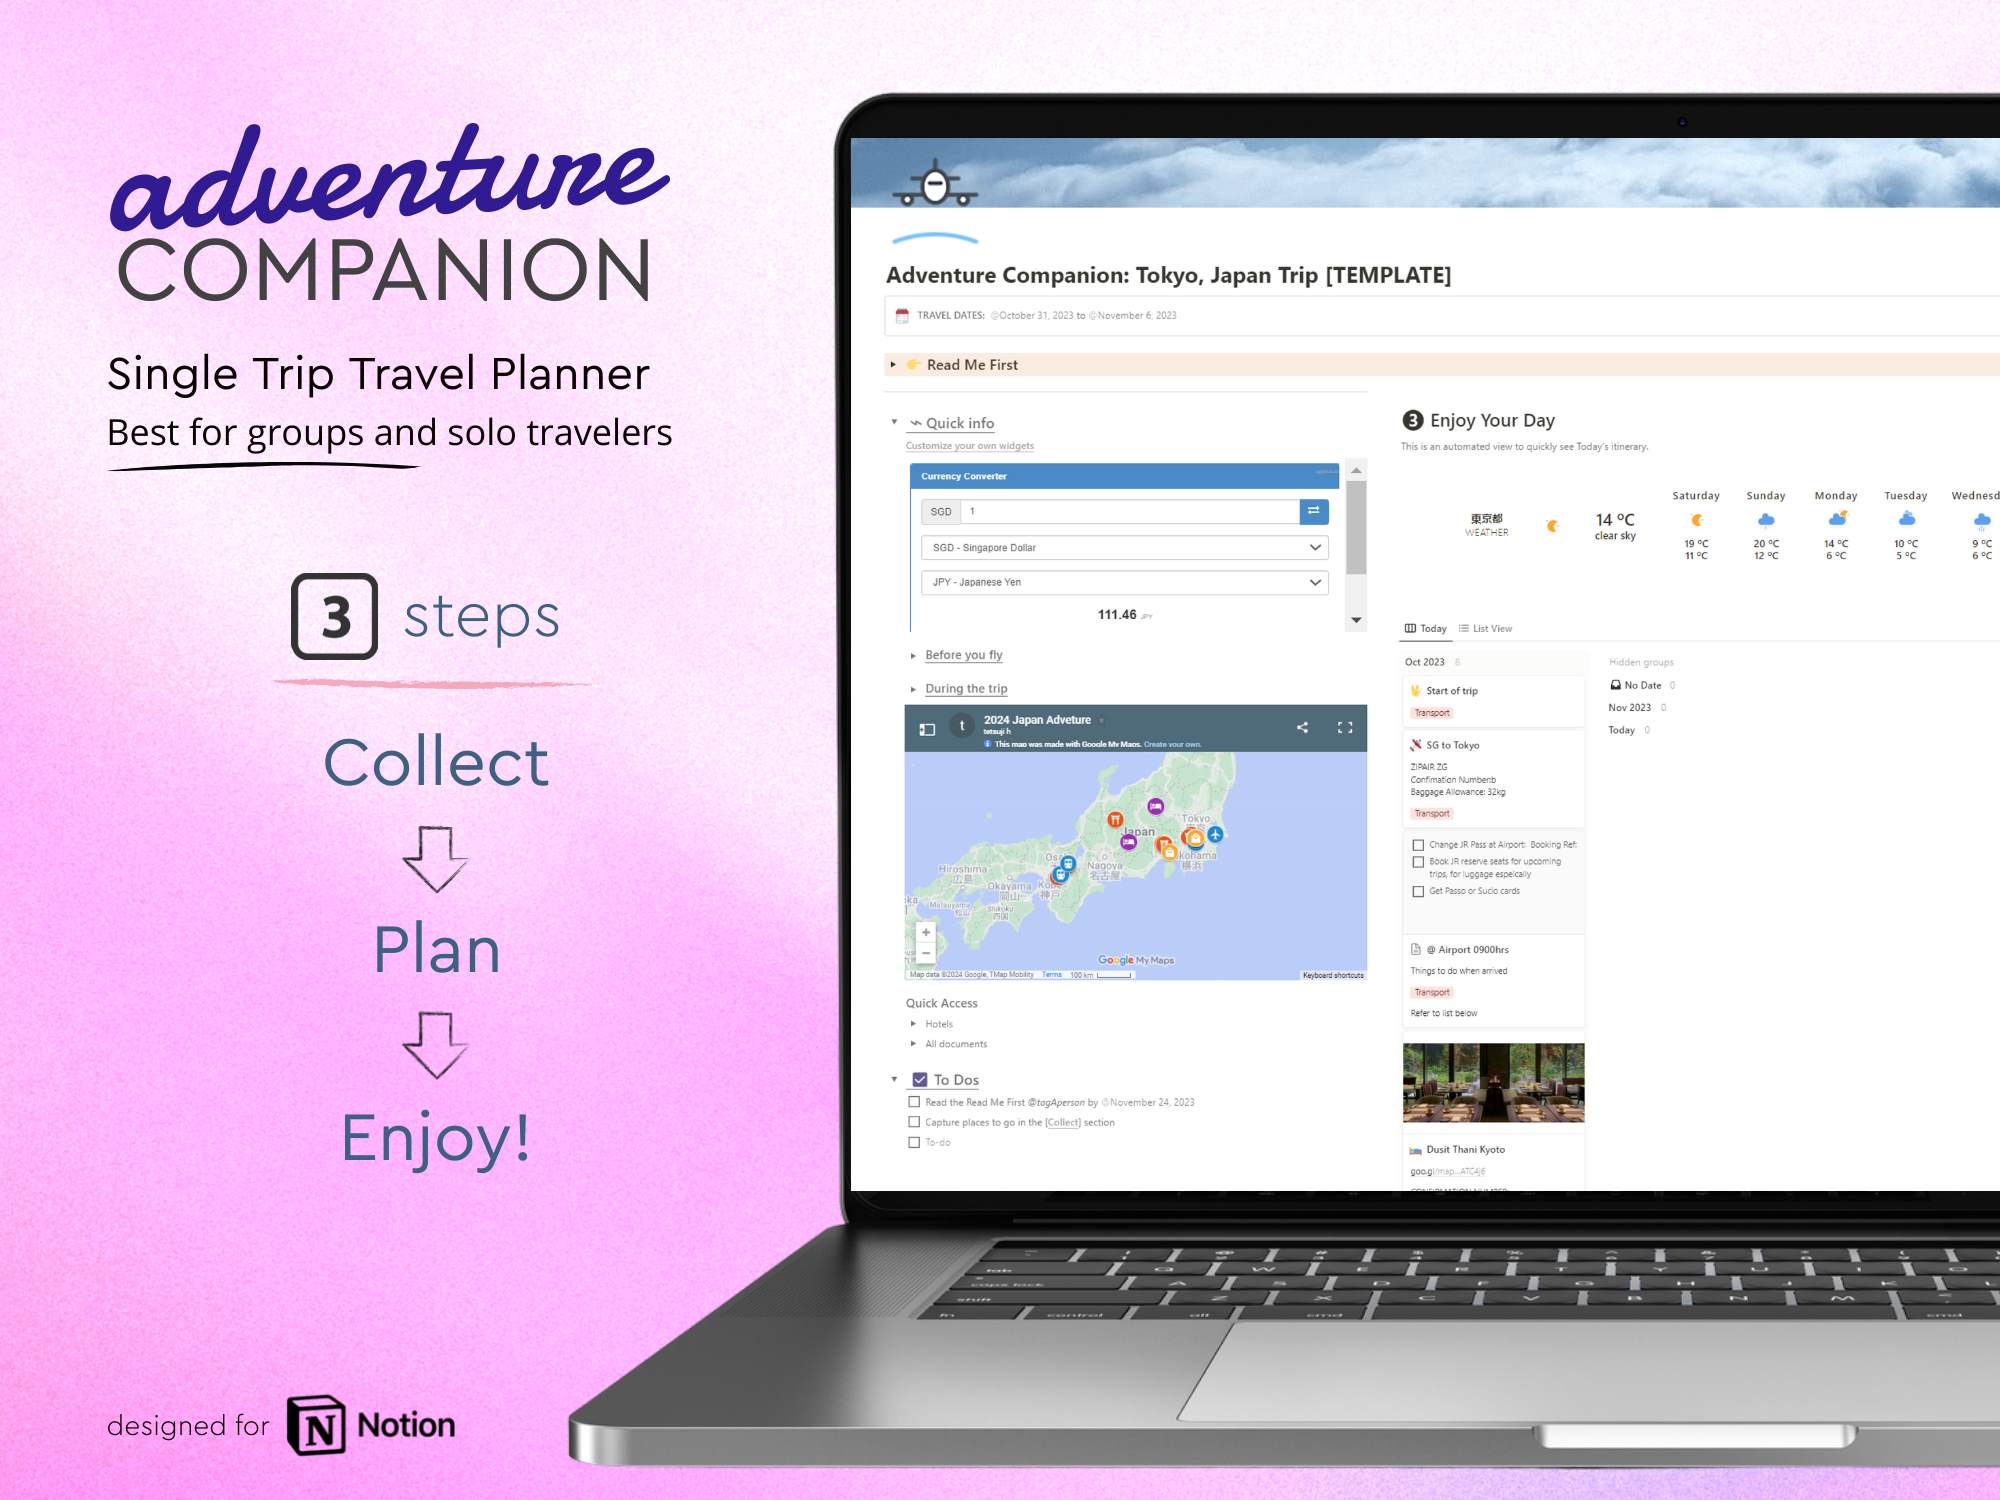 Collect, Plan, Enjoy!
Simplify trip planning with our 3 step travel planner!

Easily create ideal itineraries, collaborate with friends seamlessly, get their preference with a single click of the voting button.
And store all your important docs in one place!